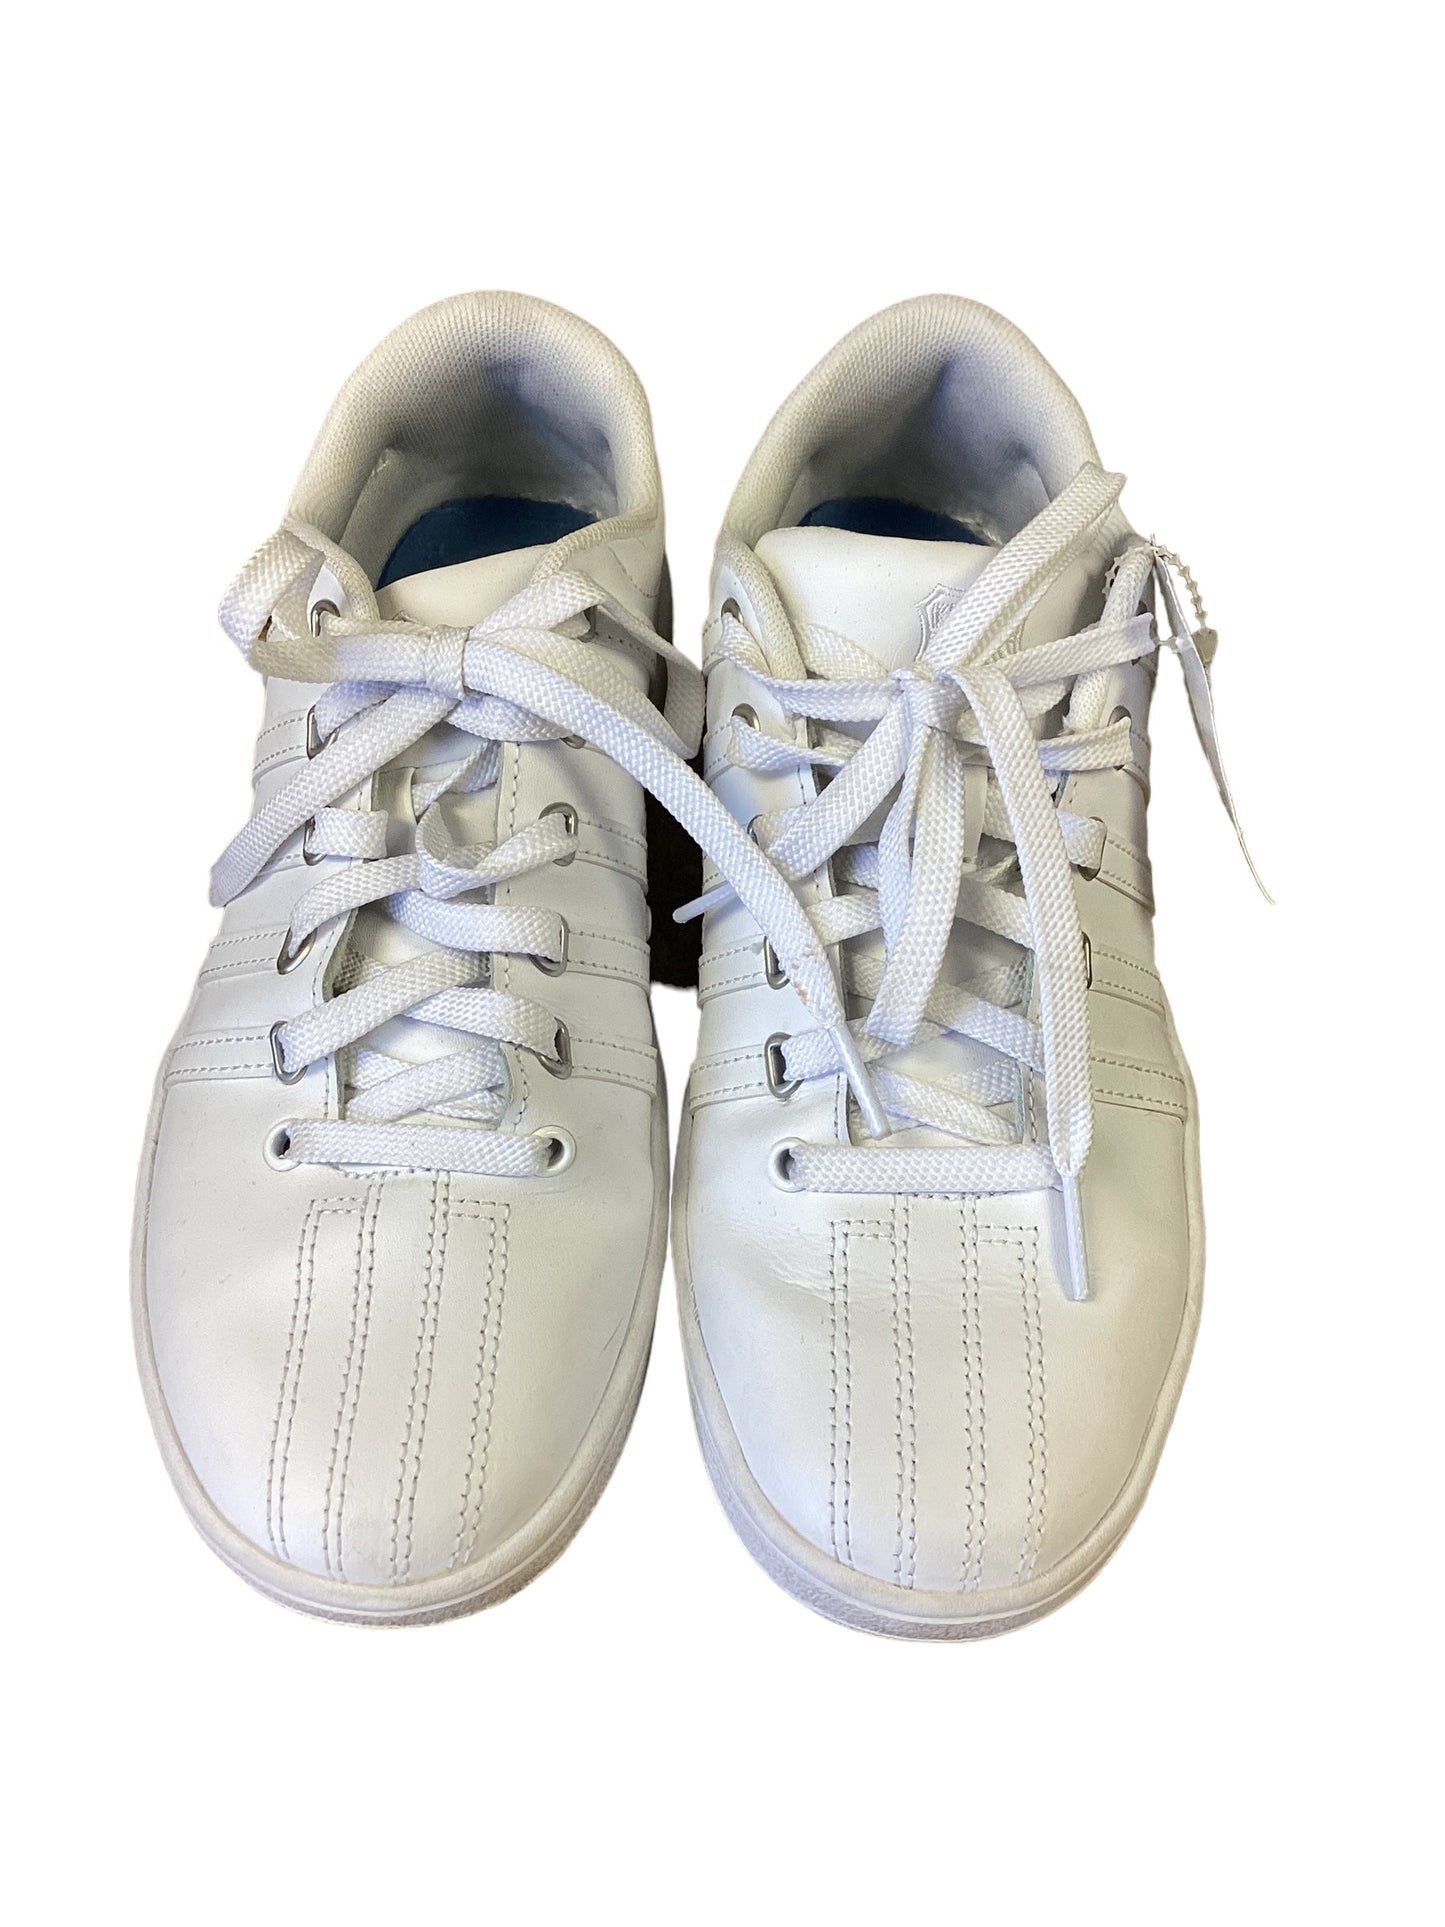 White Shoes Sneakers K Swiss, Size 7